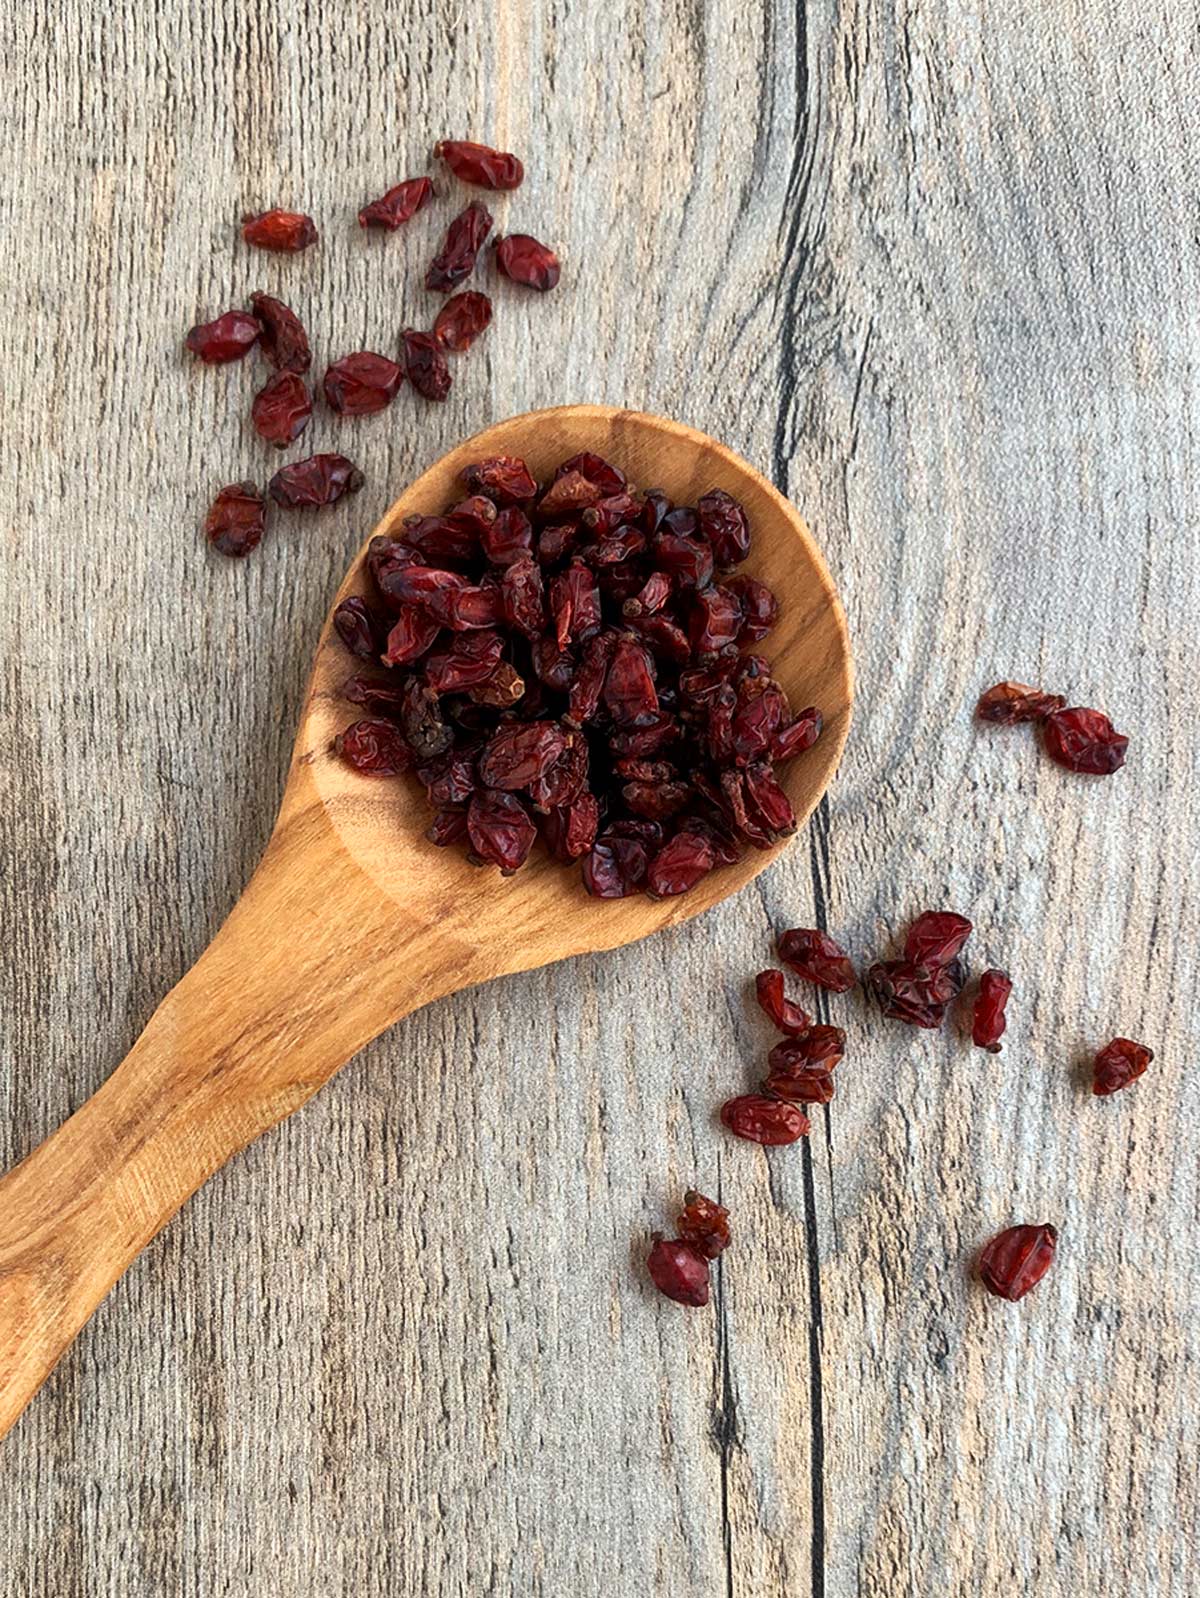 Barberries on a wooden spoon.